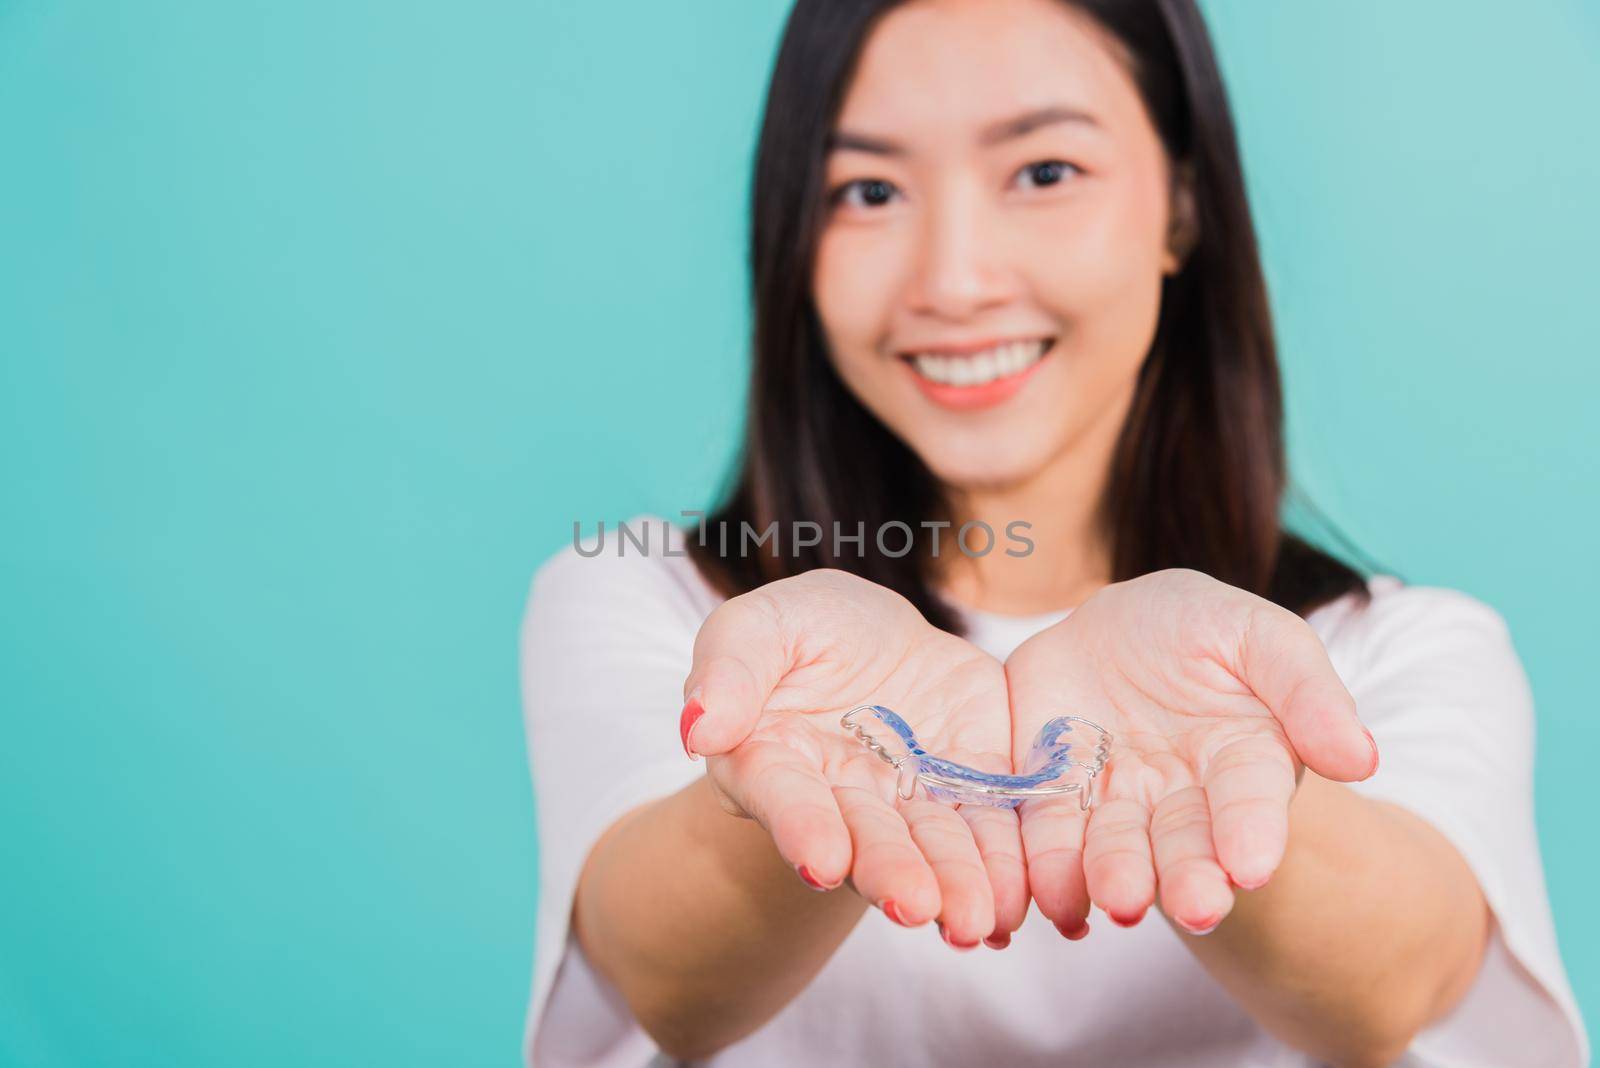 Portrait young Asian beautiful woman smiling holding silicone orthodontic retainers for teeth on hand palm, Teeth retaining tools after removable braces, Orthodontics dental healthy care concept